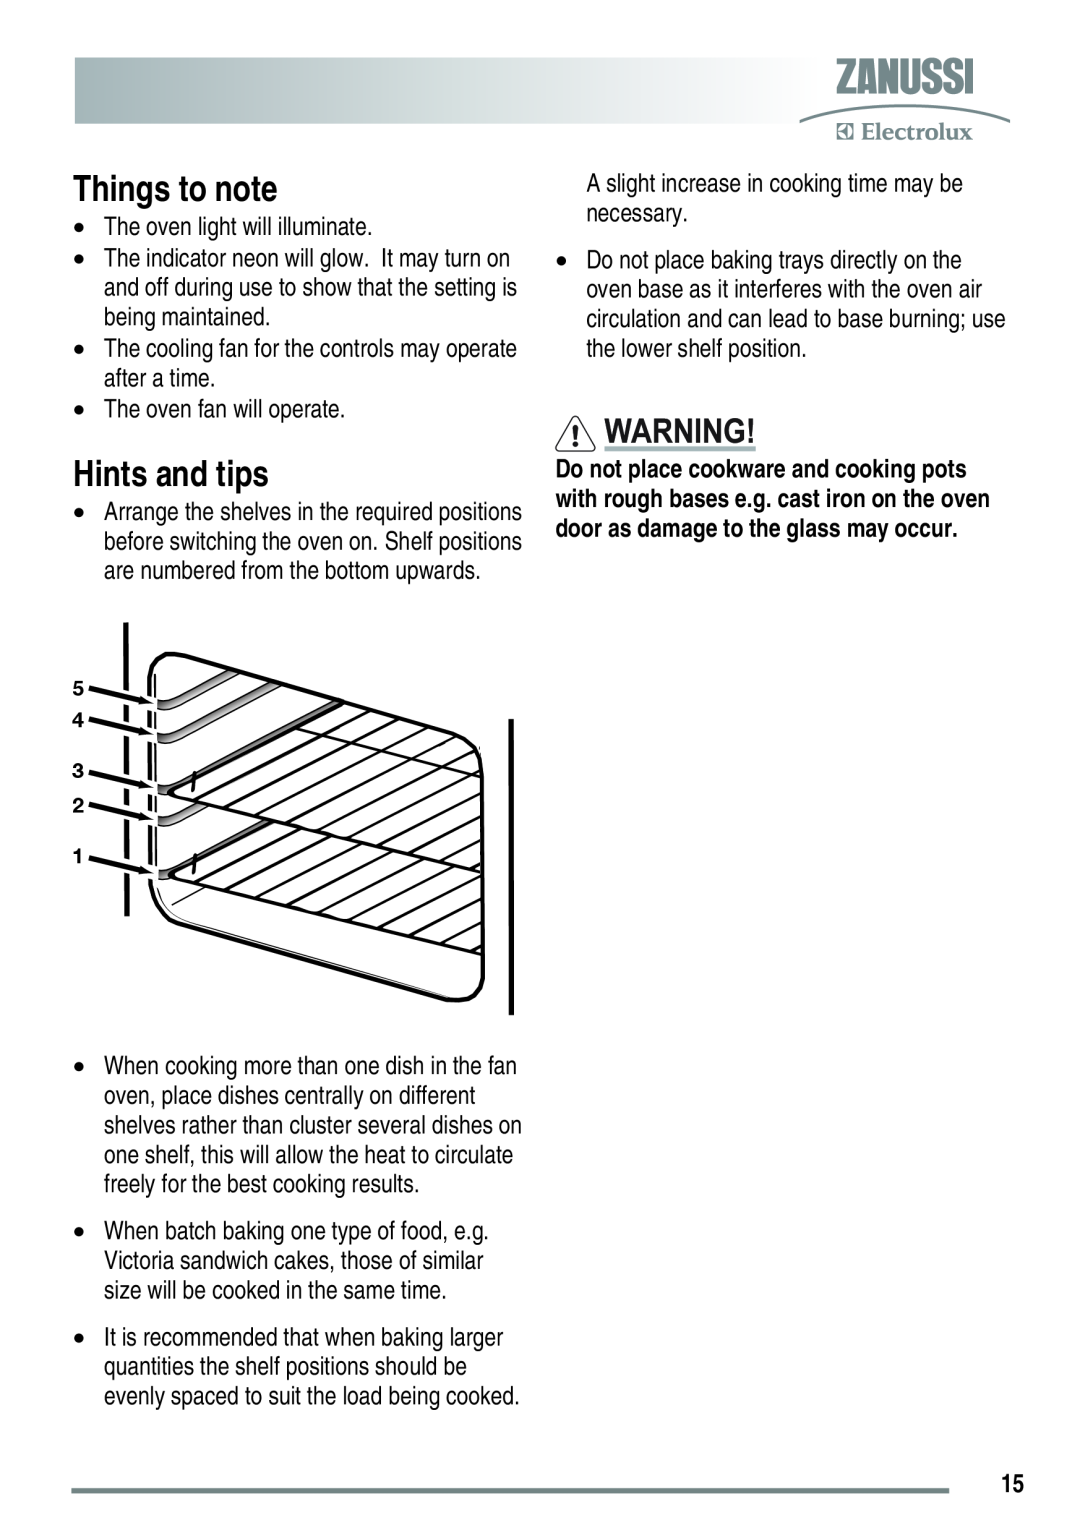 Zanussi ZKC6010 user manual Things to note, Hints and tips 